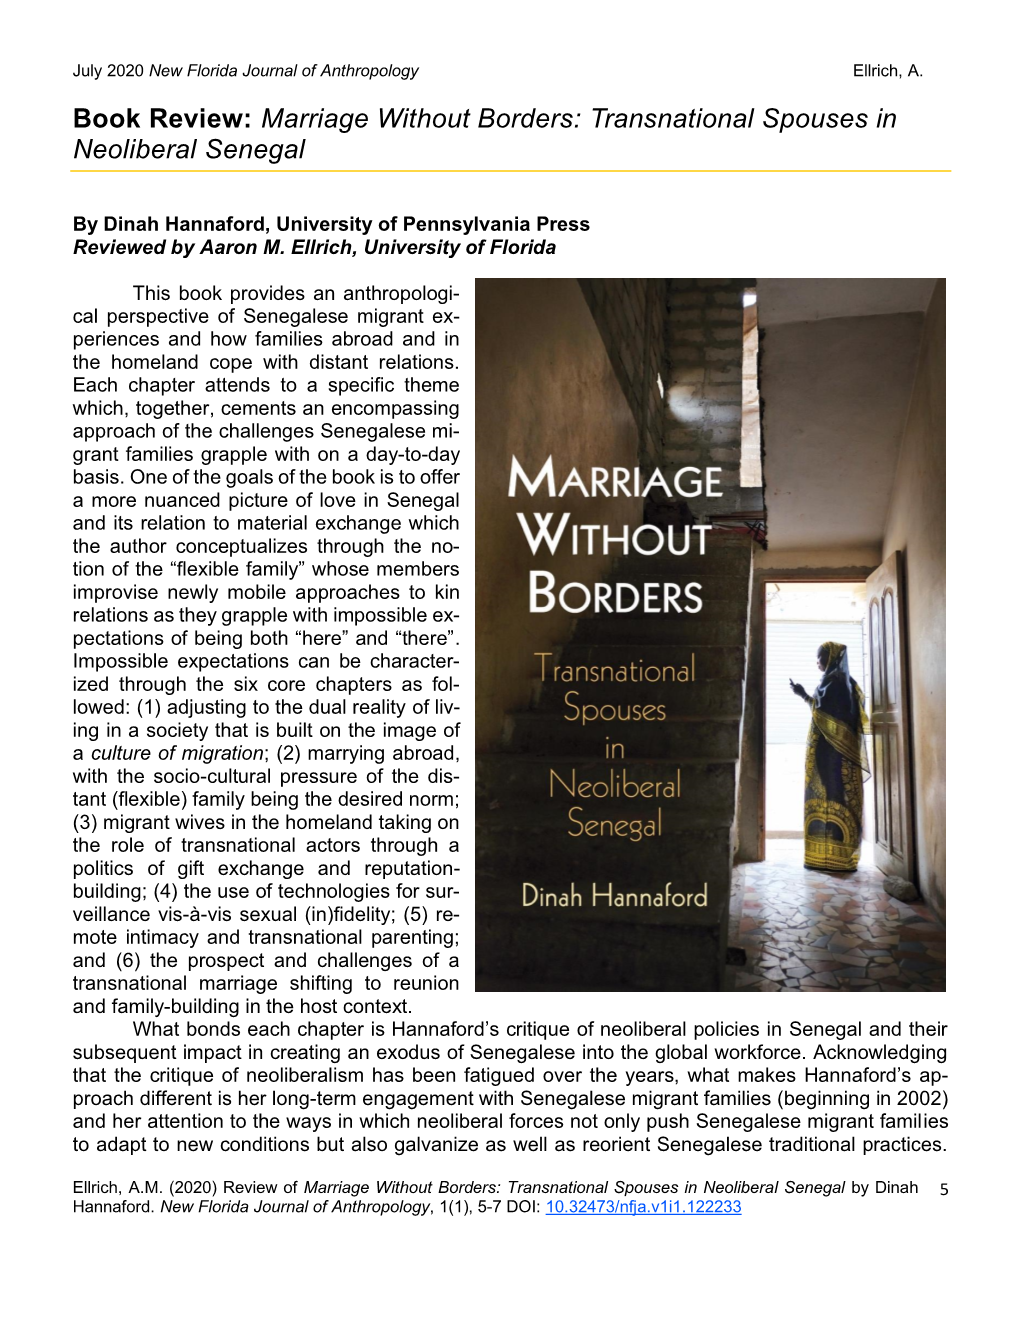 Book Review: Marriage Without Borders: Transnational Spouses in Neoliberal Senegal